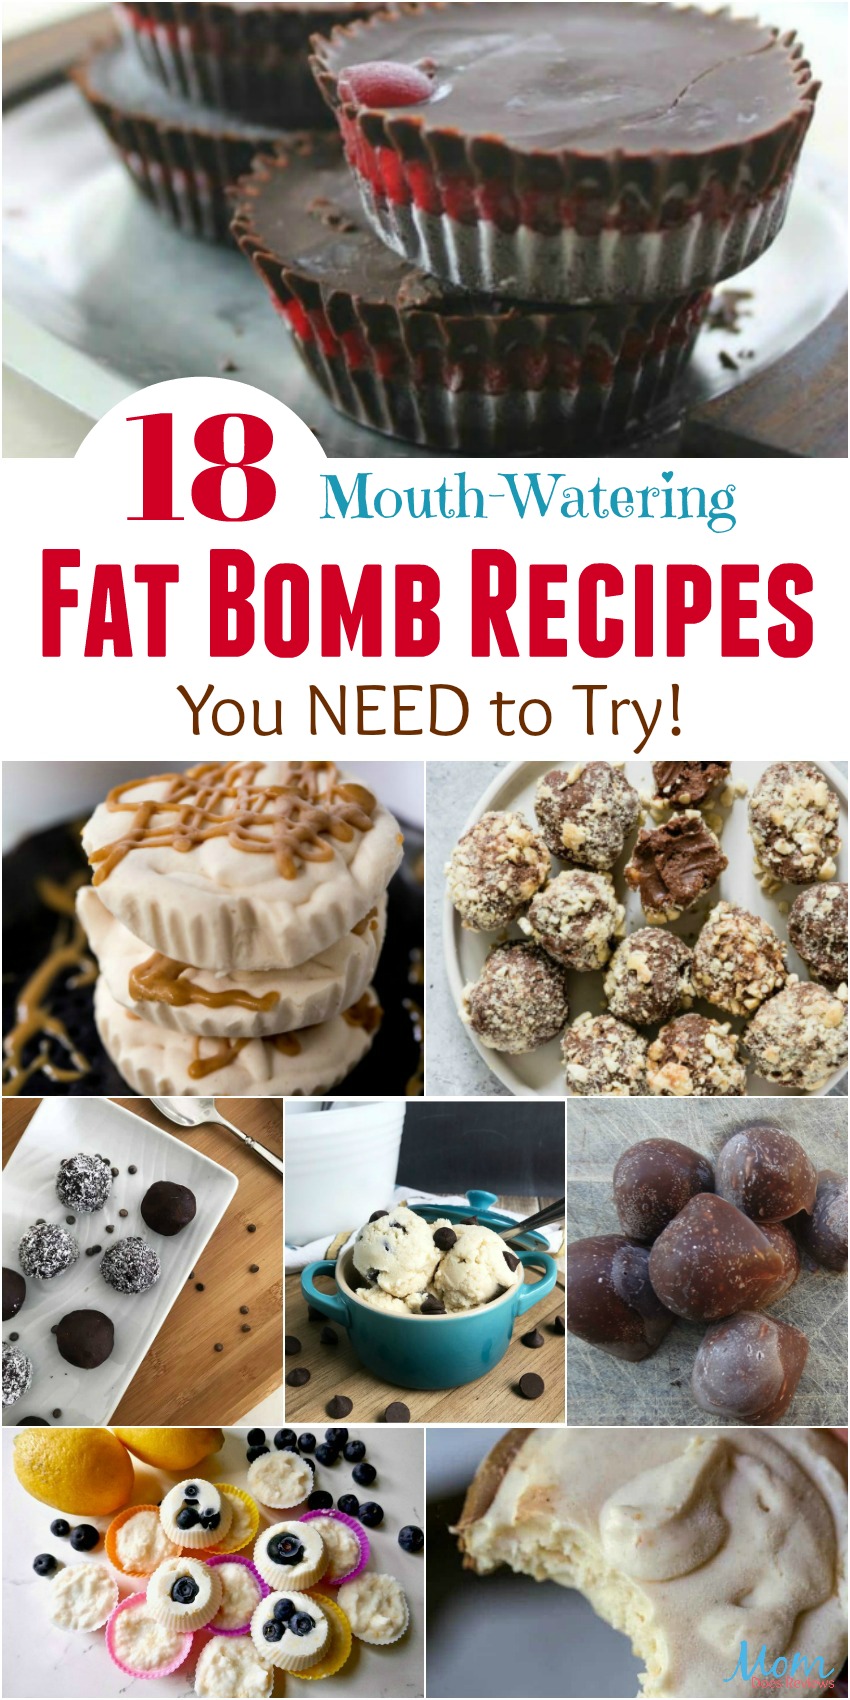 18 Mouth-Watering Fat Bomb Recipes You NEED to Try!